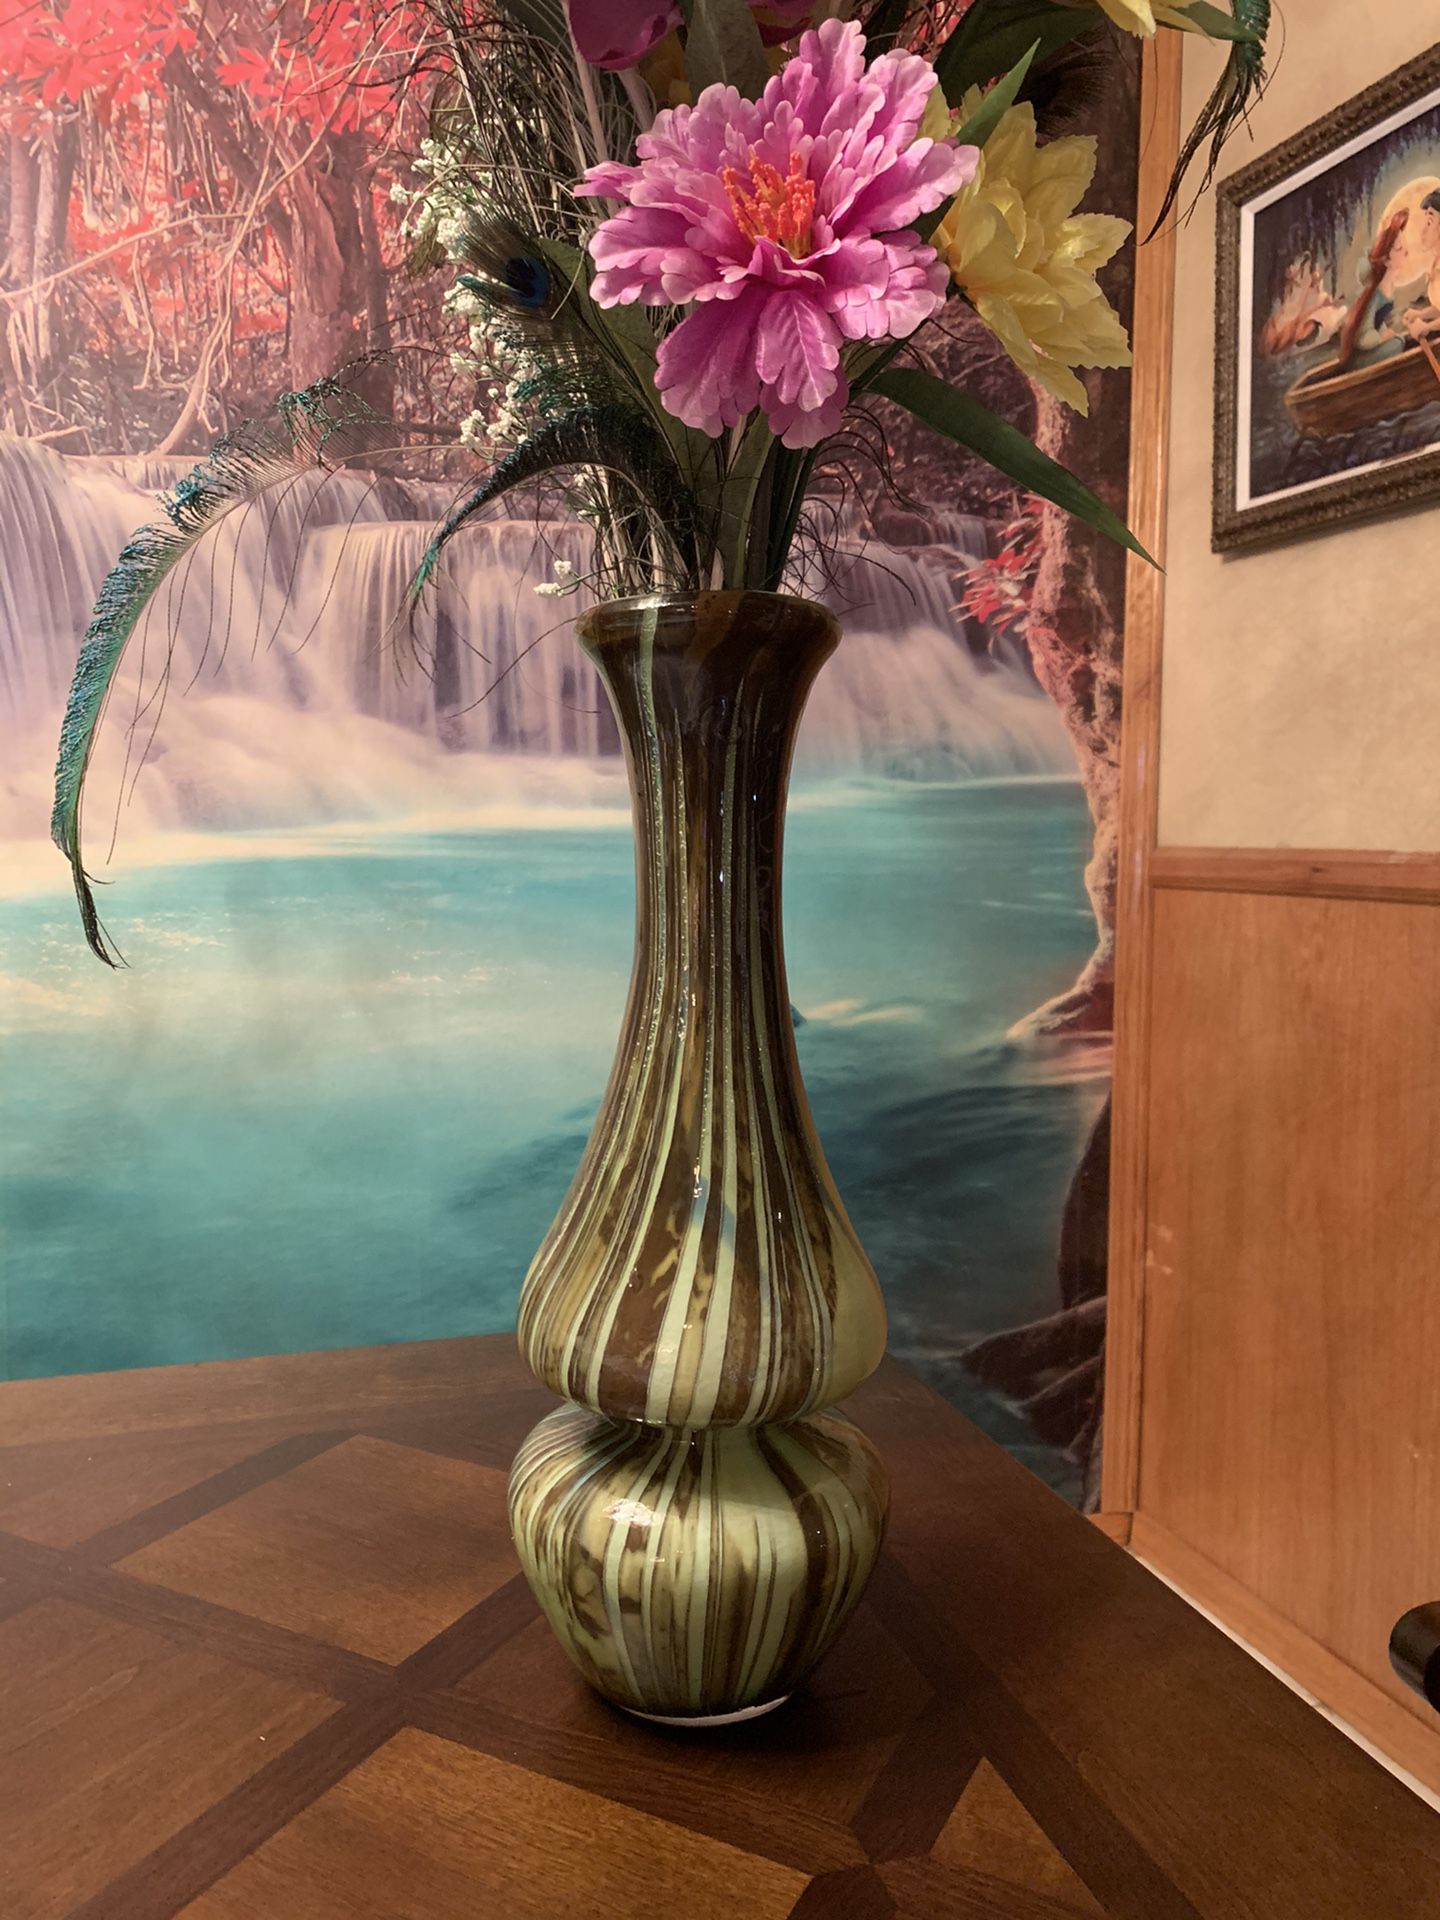 Tall 20” Hand Blown Glass Vase with Flower Arrangement! A1 Quality Lovely!